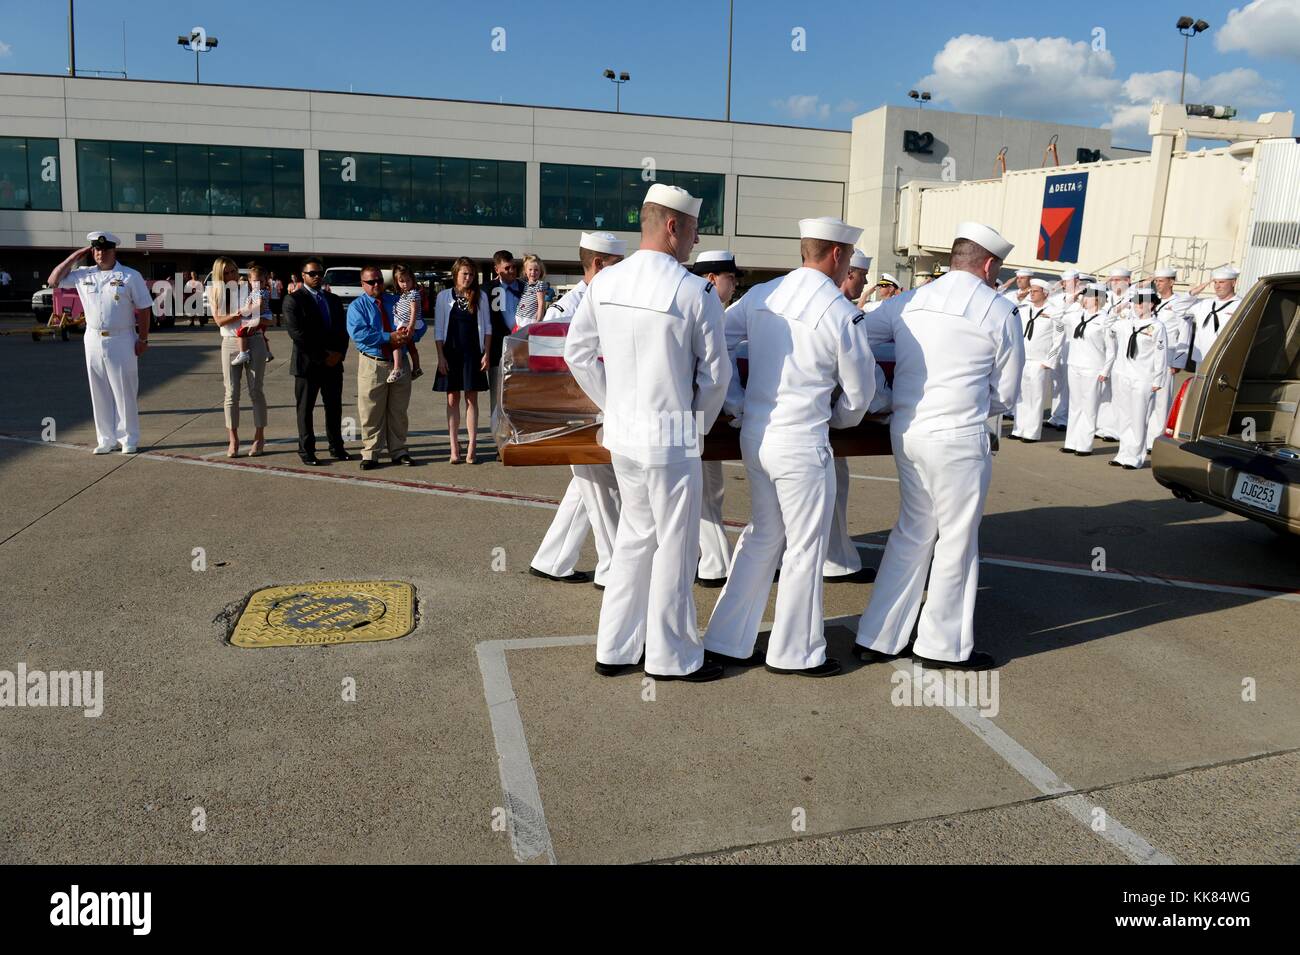 Sailors assigned to Navy Operational Support Center NOSC Nashville perform plane side honors for the remains of Logistics Specialist 2nd Class Randall Smith at Nashville International Airport, Nashville, Tennessee. Image courtesy Mass Communication Specialist 1st Class Dustin Q. Diaz/US Navy, 2015. Stock Photo